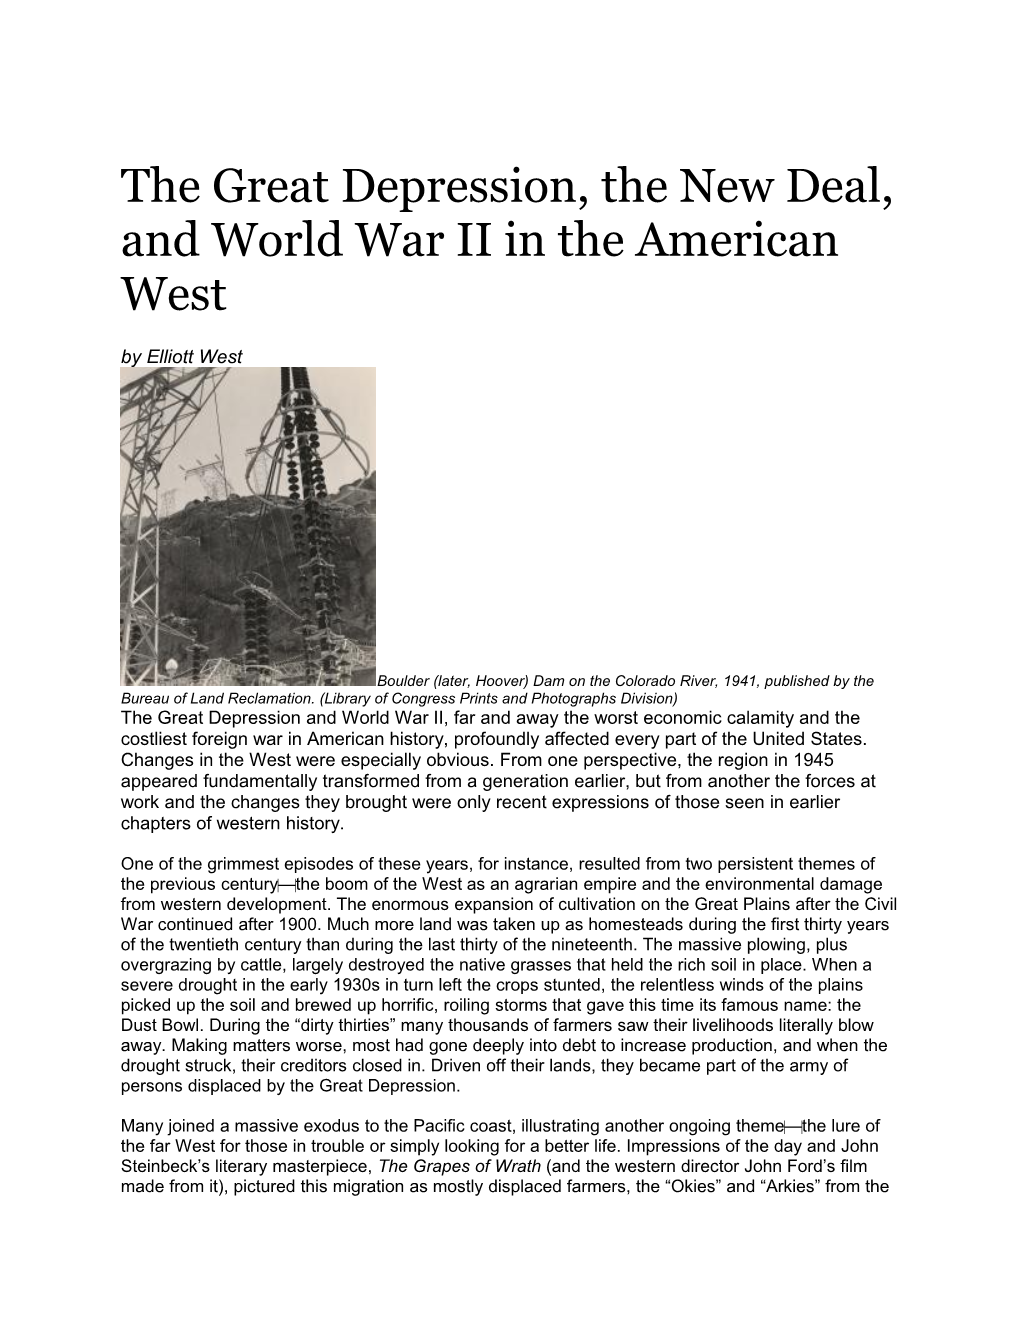 The Great Depression, the New Deal, and World War II in the American West